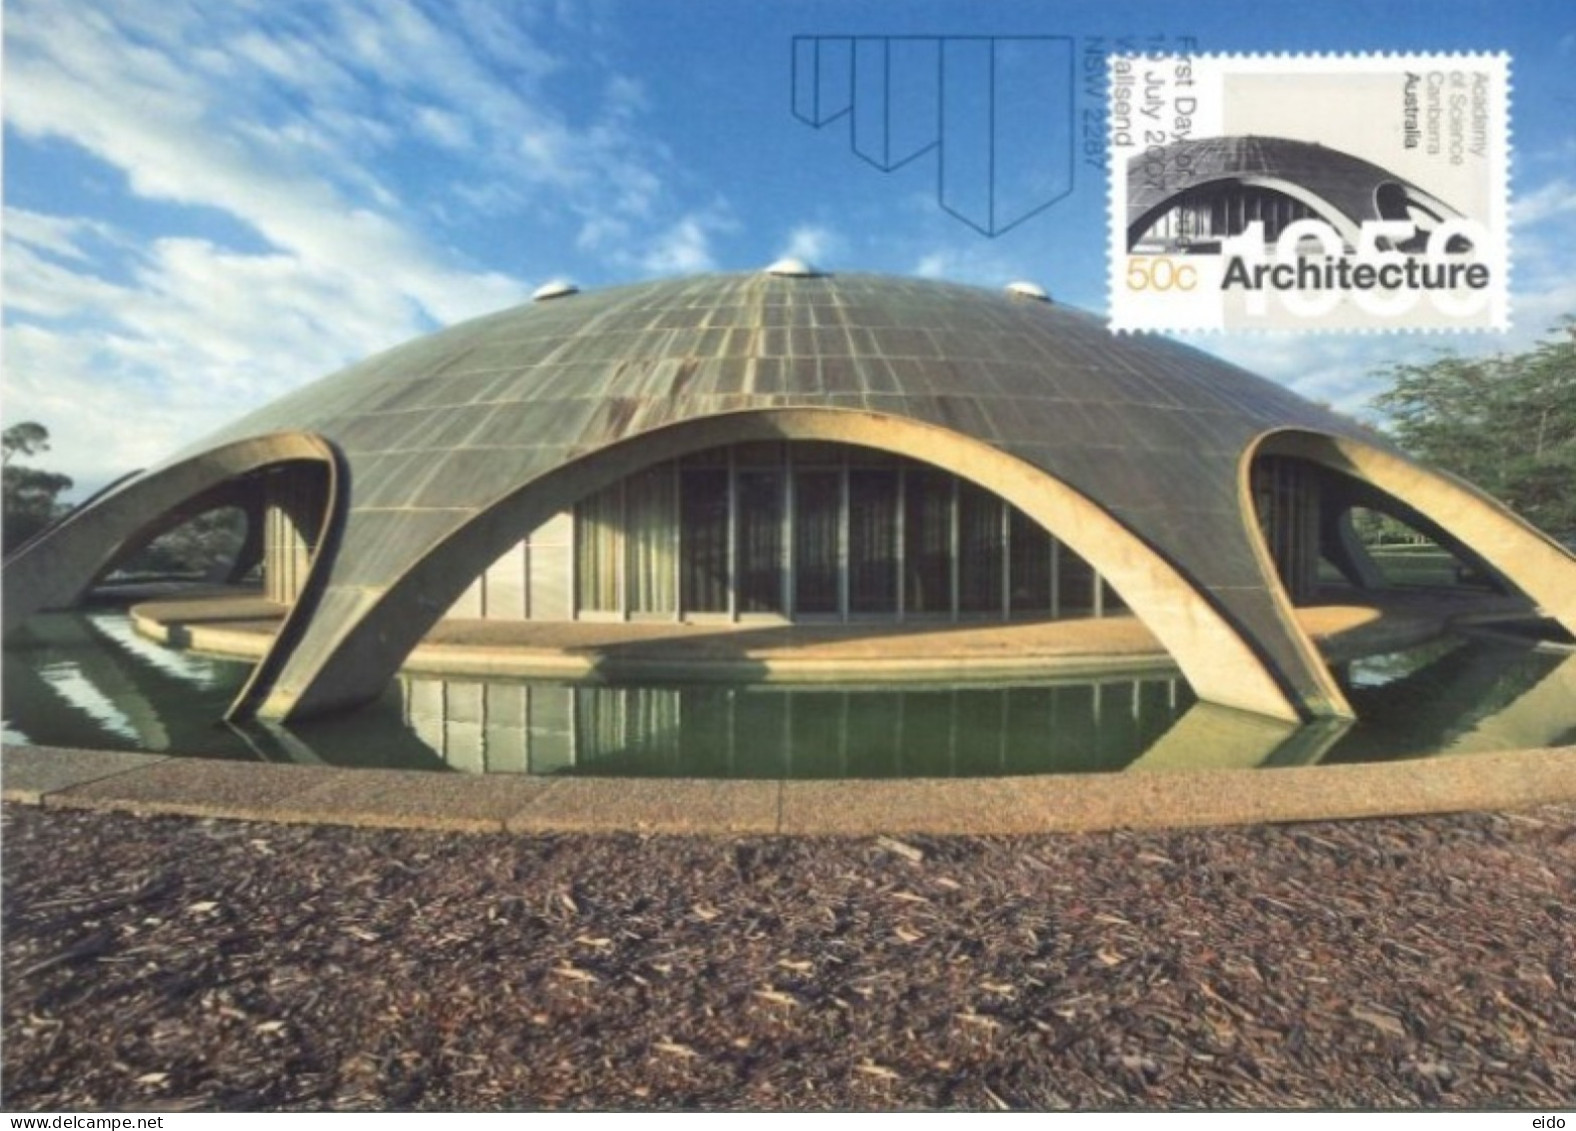 AUSTRALIA  : 2007, POSTAGE PRE PAID POSTCARD OF AUSTRALIAN ARCHITECTURE WITH FD OF ISSUE STAMP. - Briefe U. Dokumente